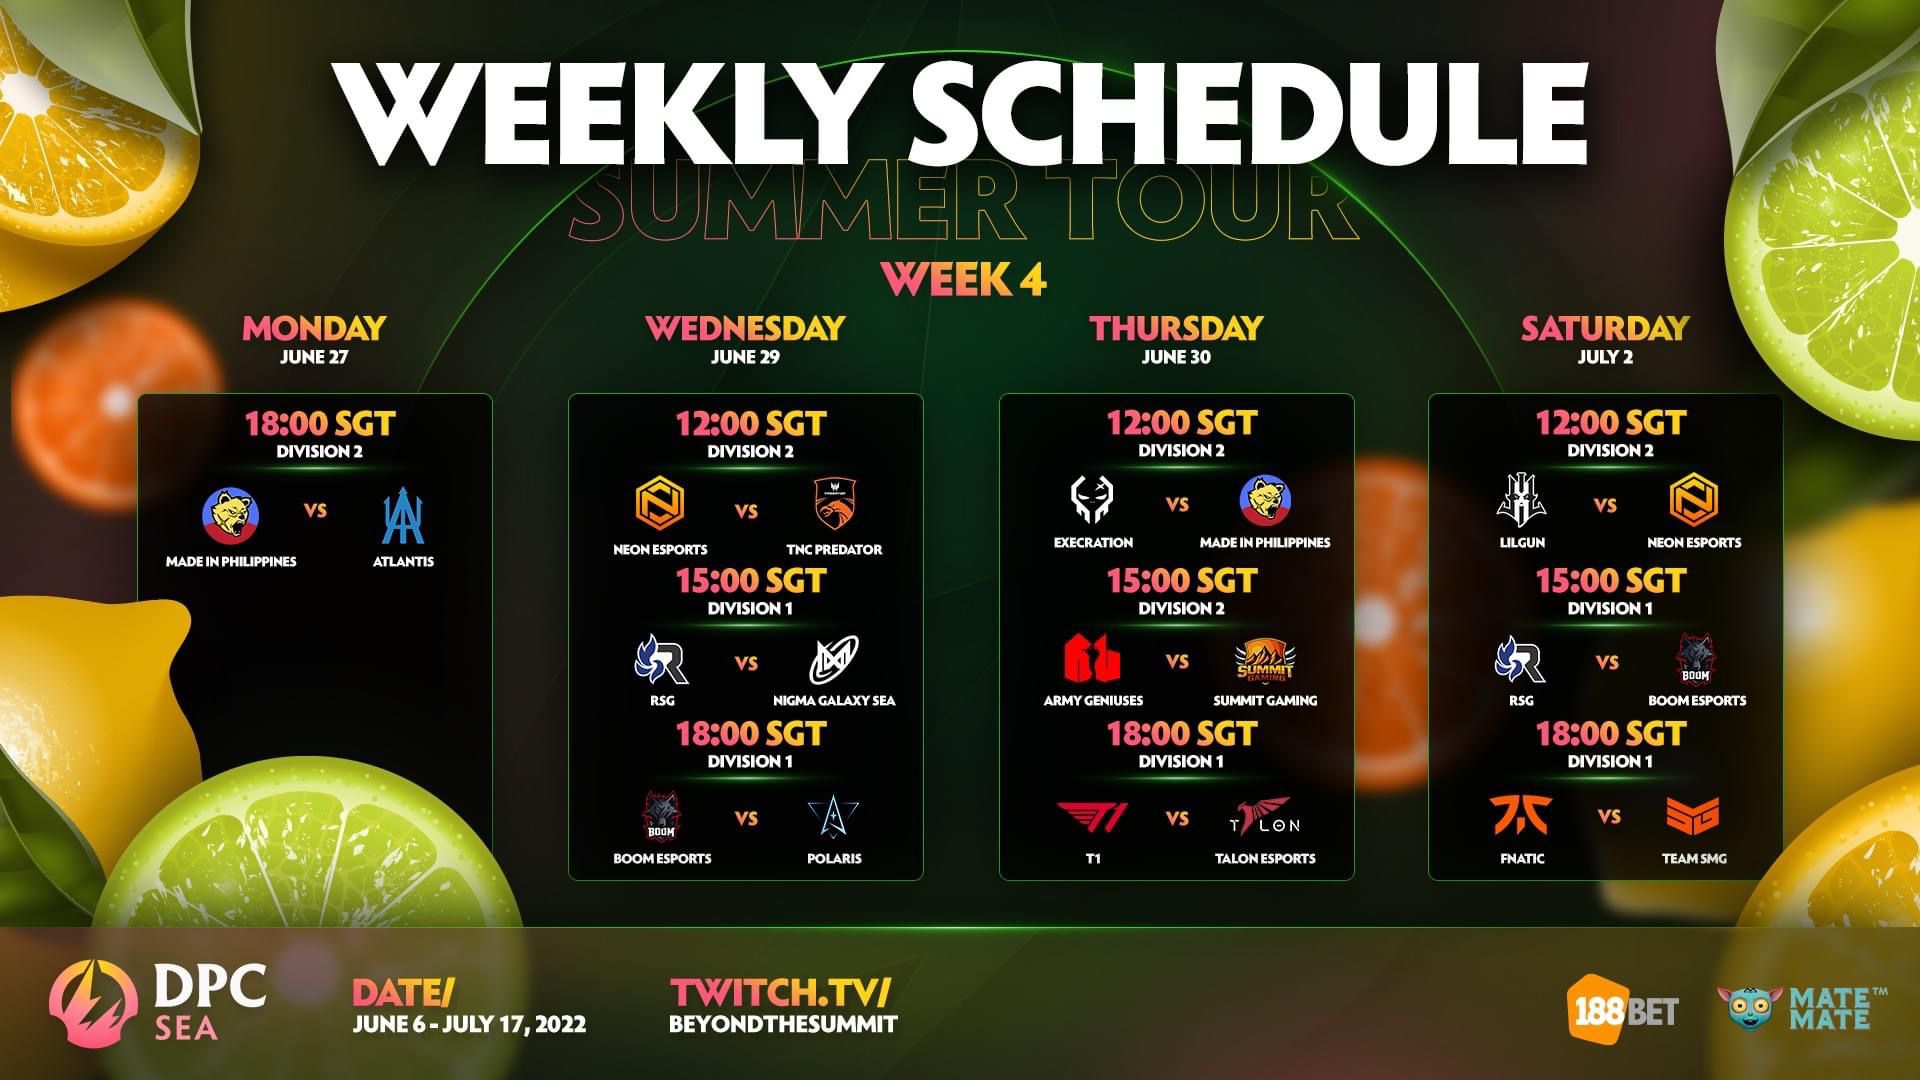 mate mate gaming weekly schedule